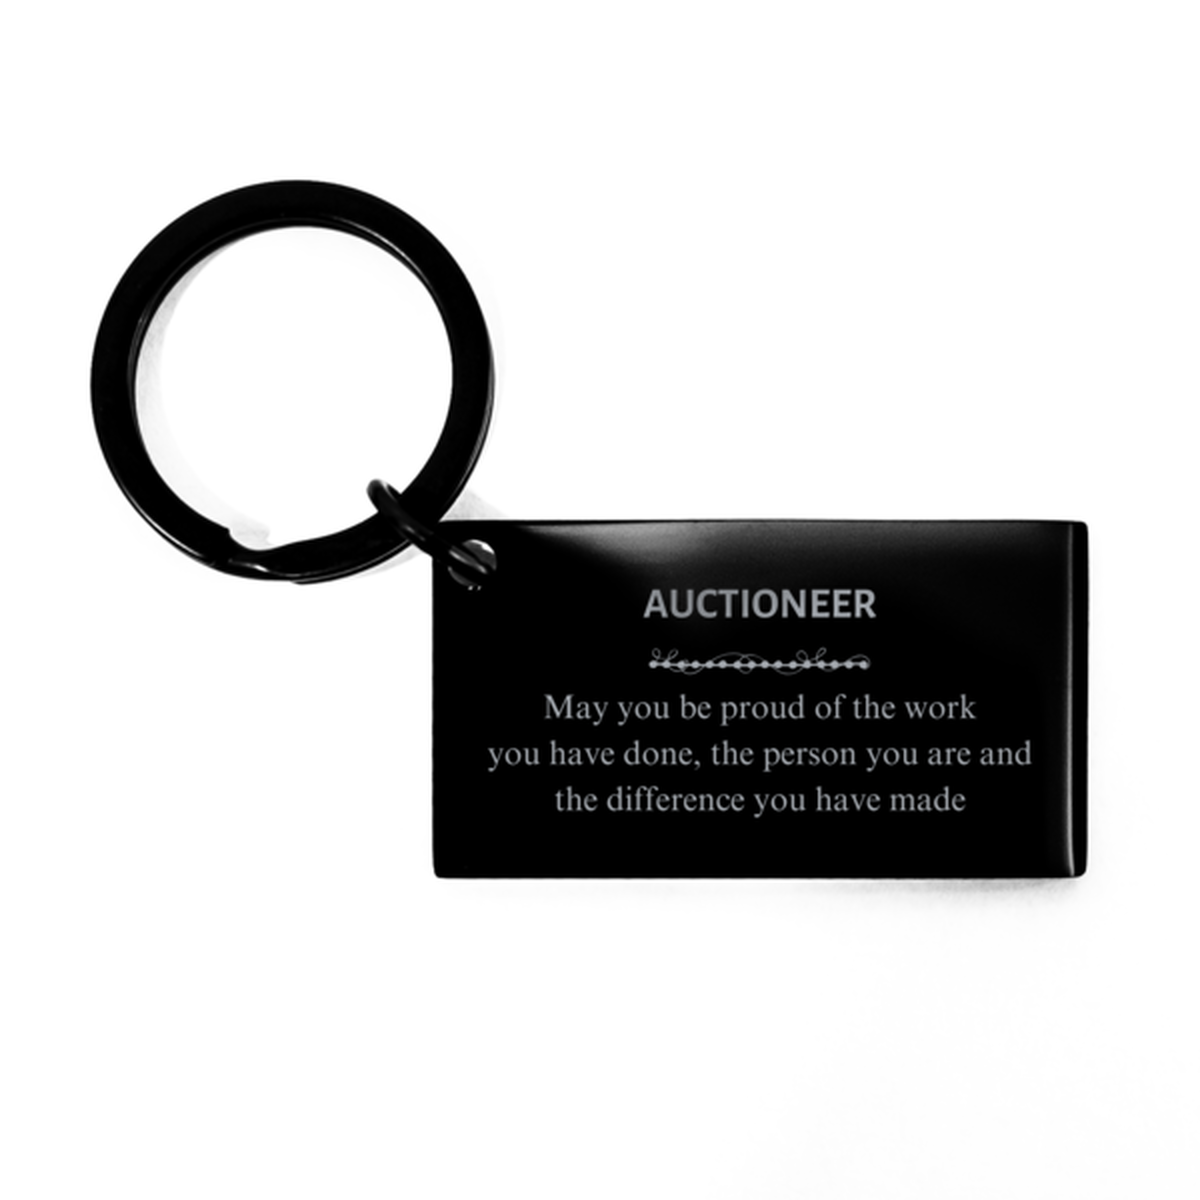 Correctional Officer May you be proud of the work you have done, Retirement Auctioneer Keychain for Colleague Appreciation Gifts Amazing for Auctioneer